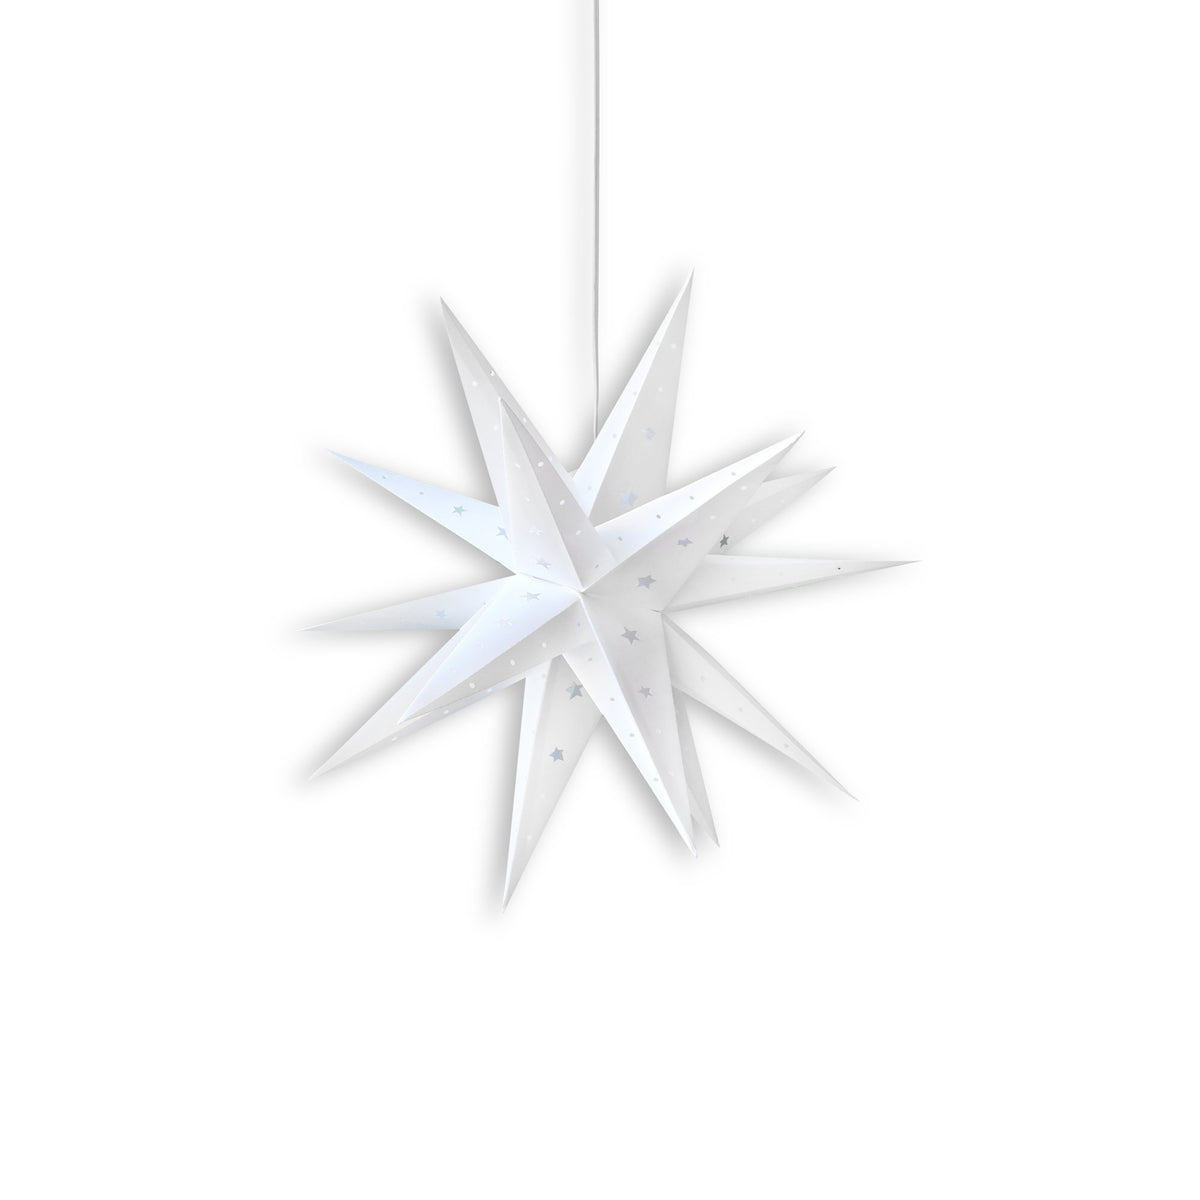 16&quot; White Moravian Weatherproof Star Lantern Lamp, Multi-Point Hanging Decoration (Shade Only)